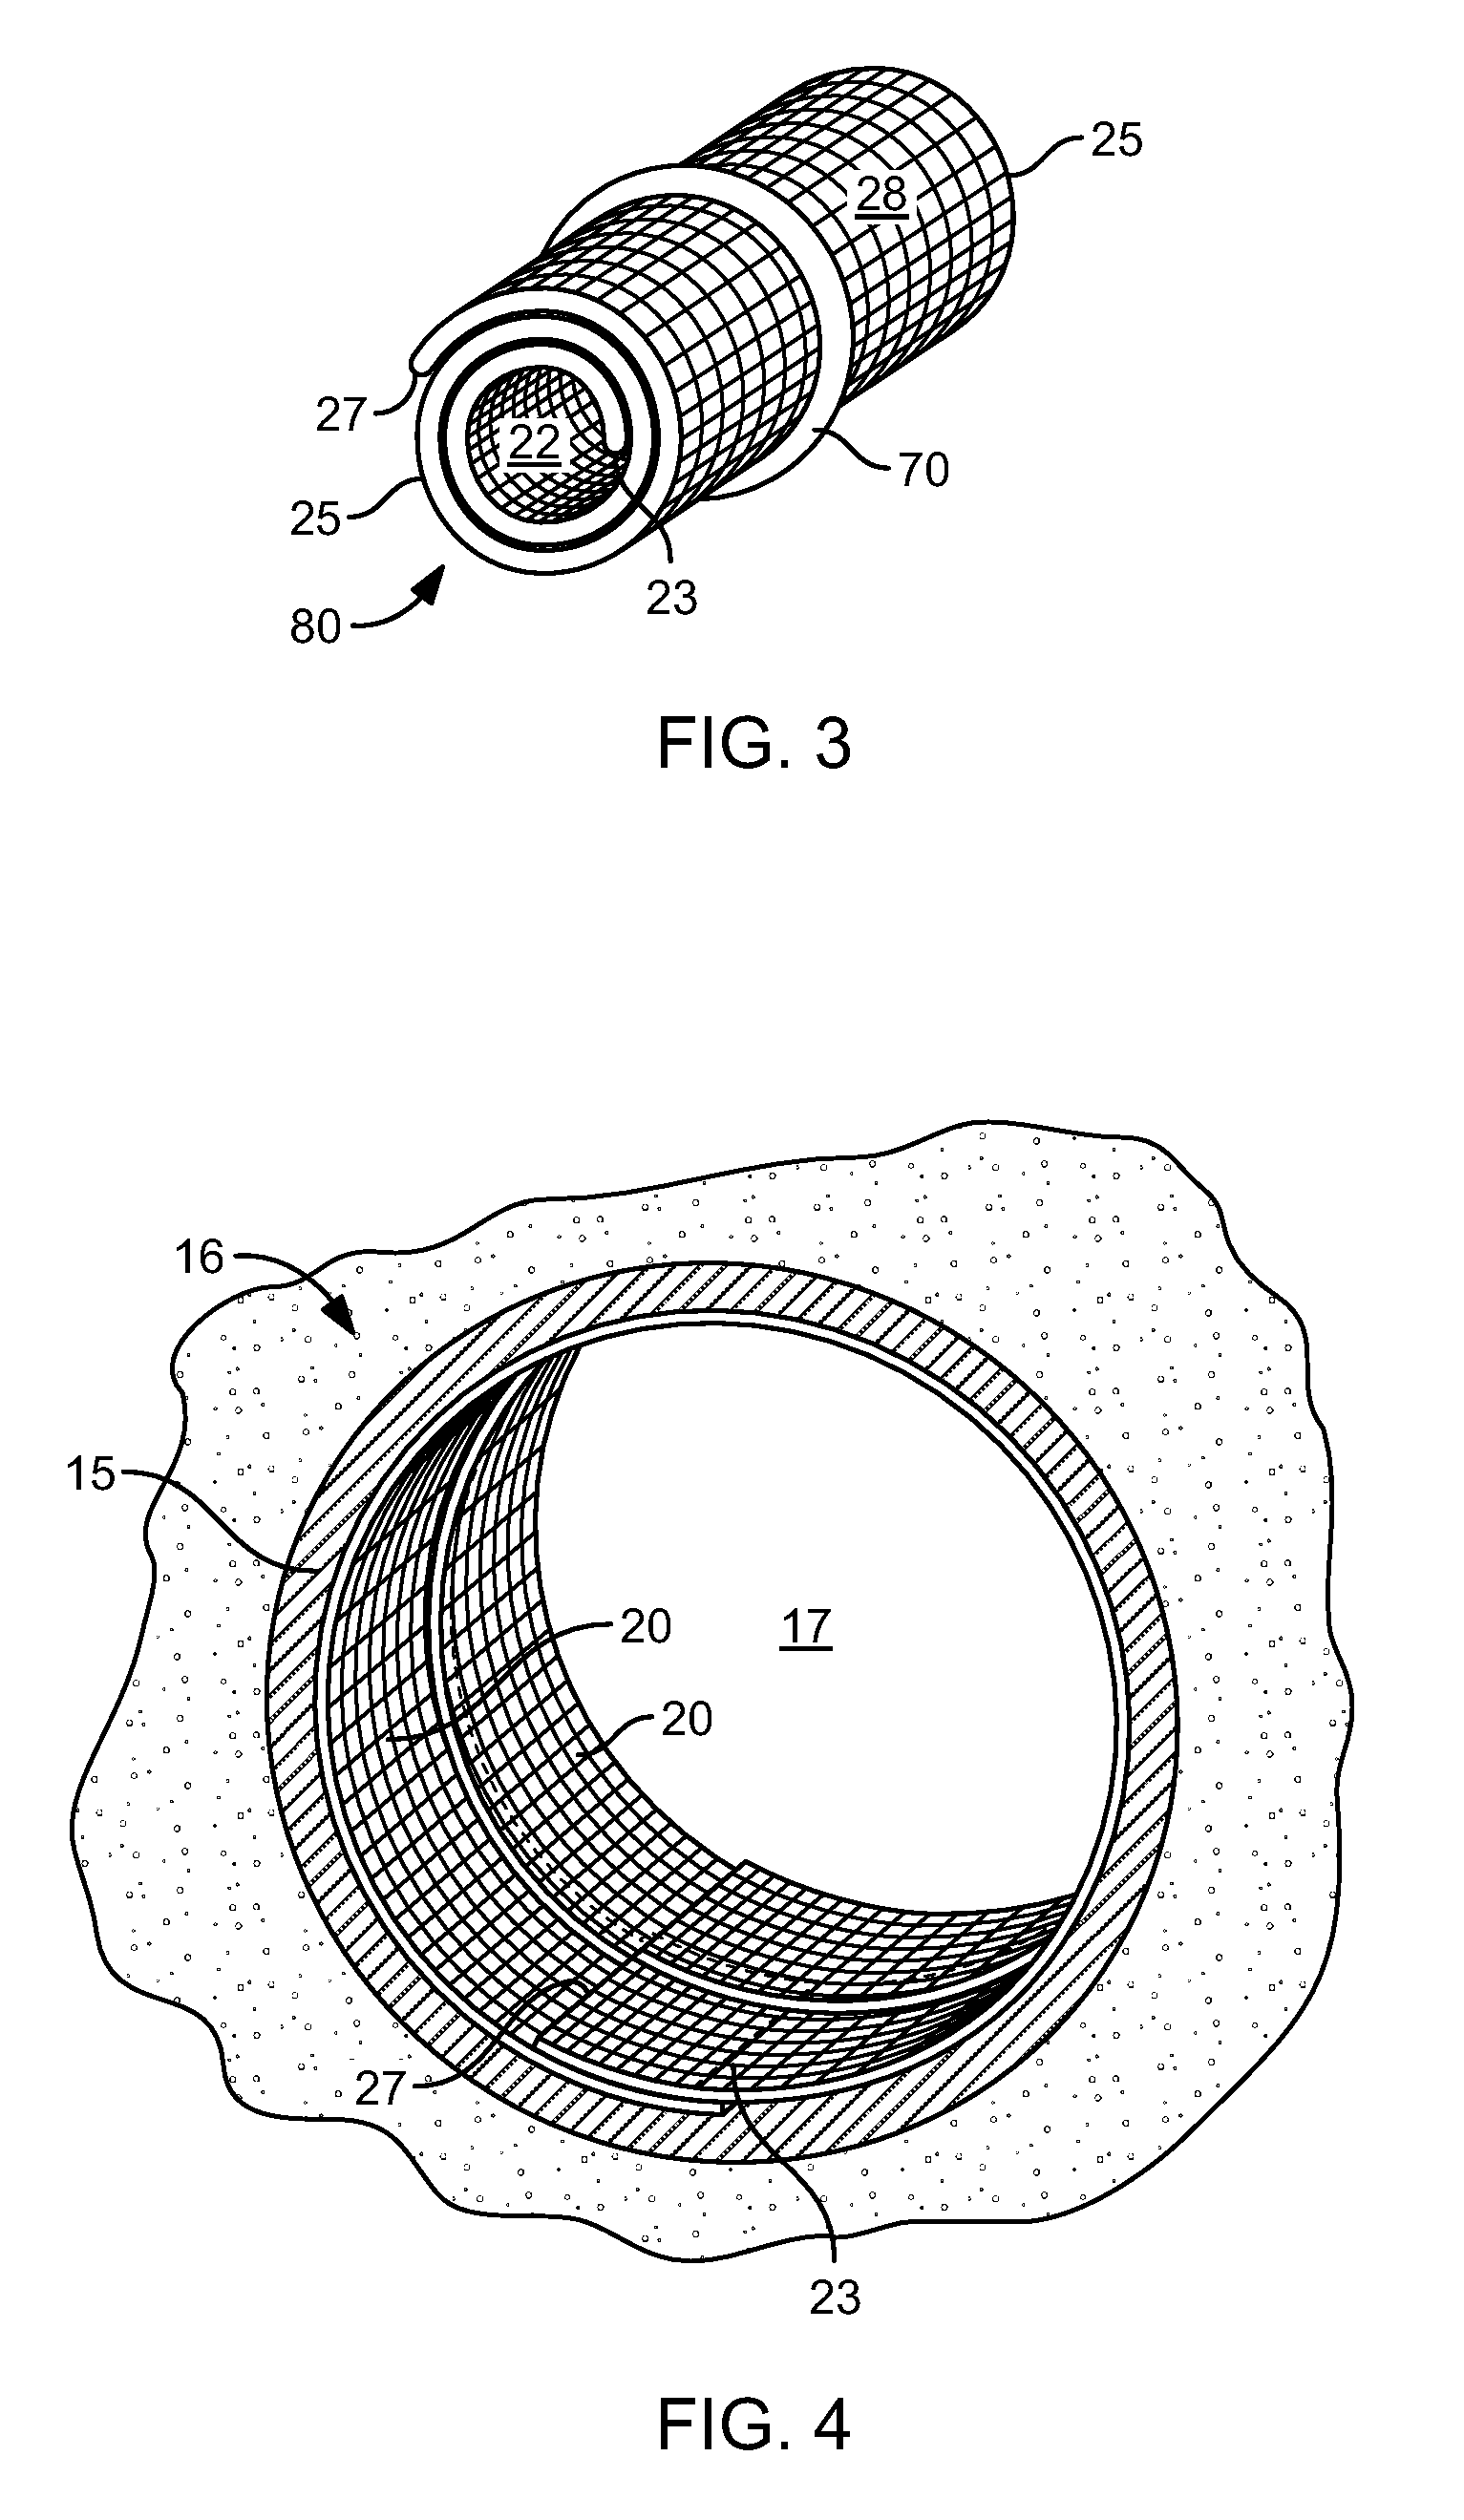 Apparatus and Method of Reinforcing a Conduit or Vessel